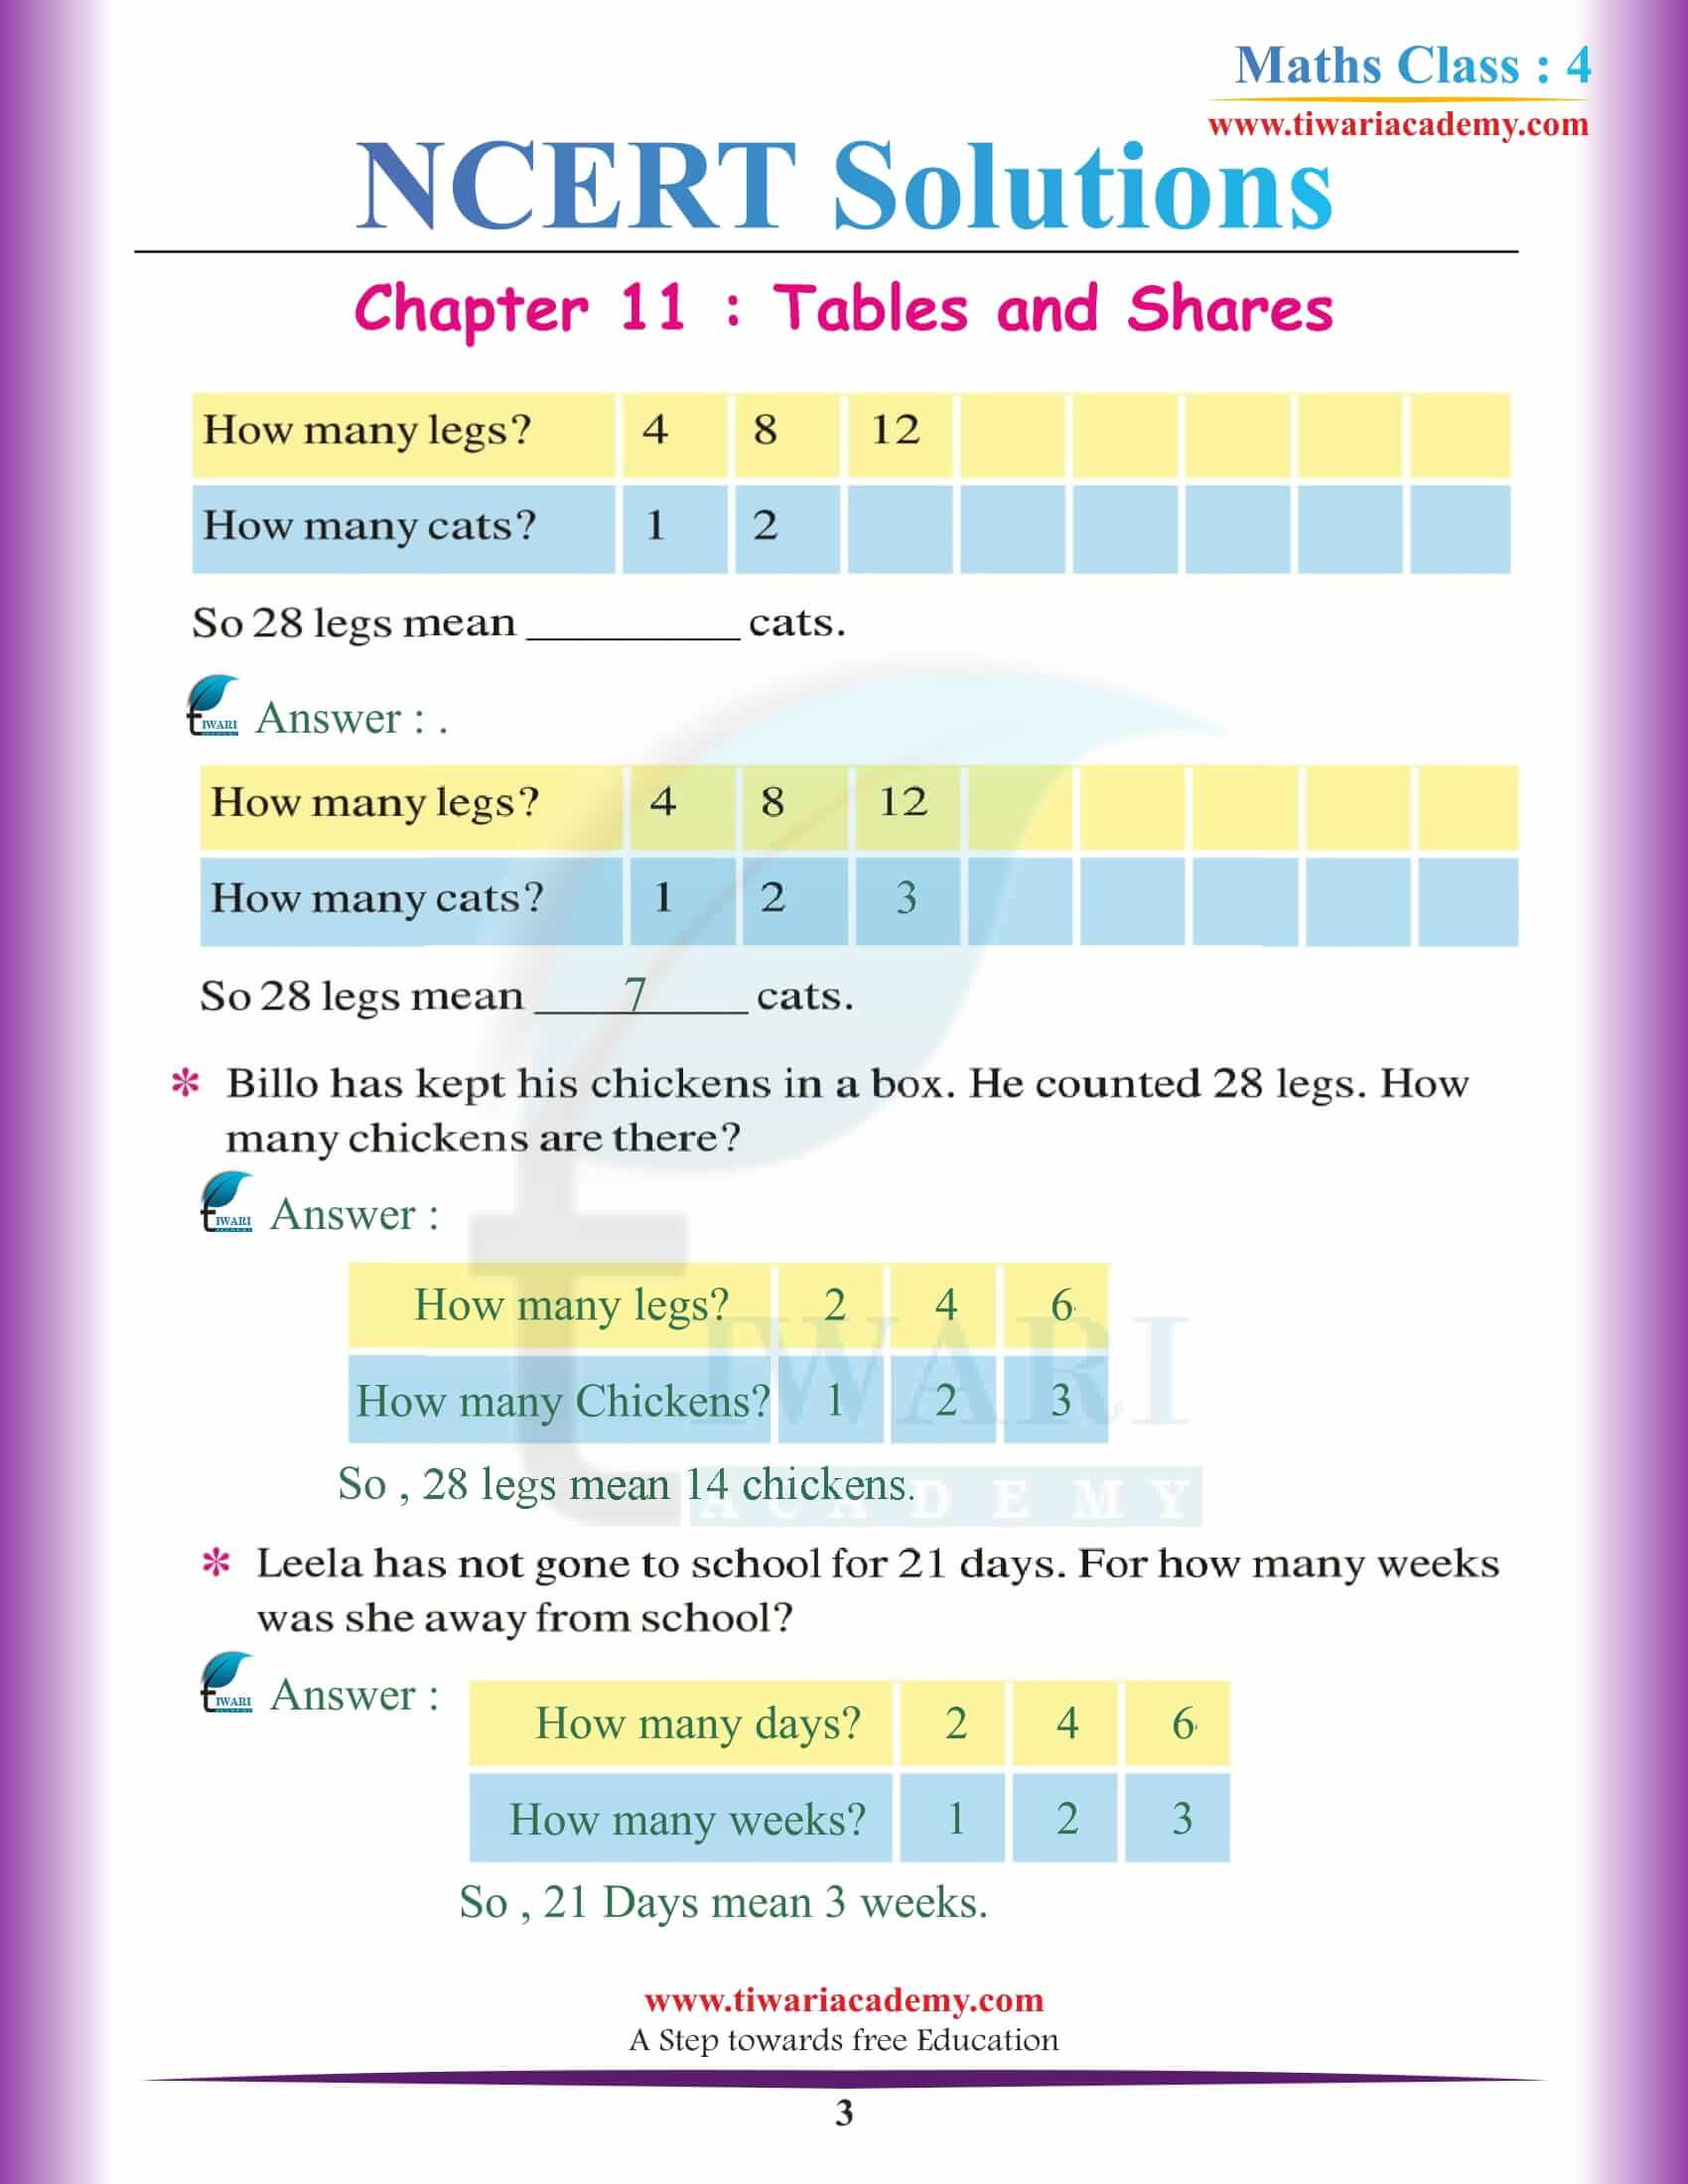 NCERT Solutions for Class 4 Maths Chapter 11 in PDF